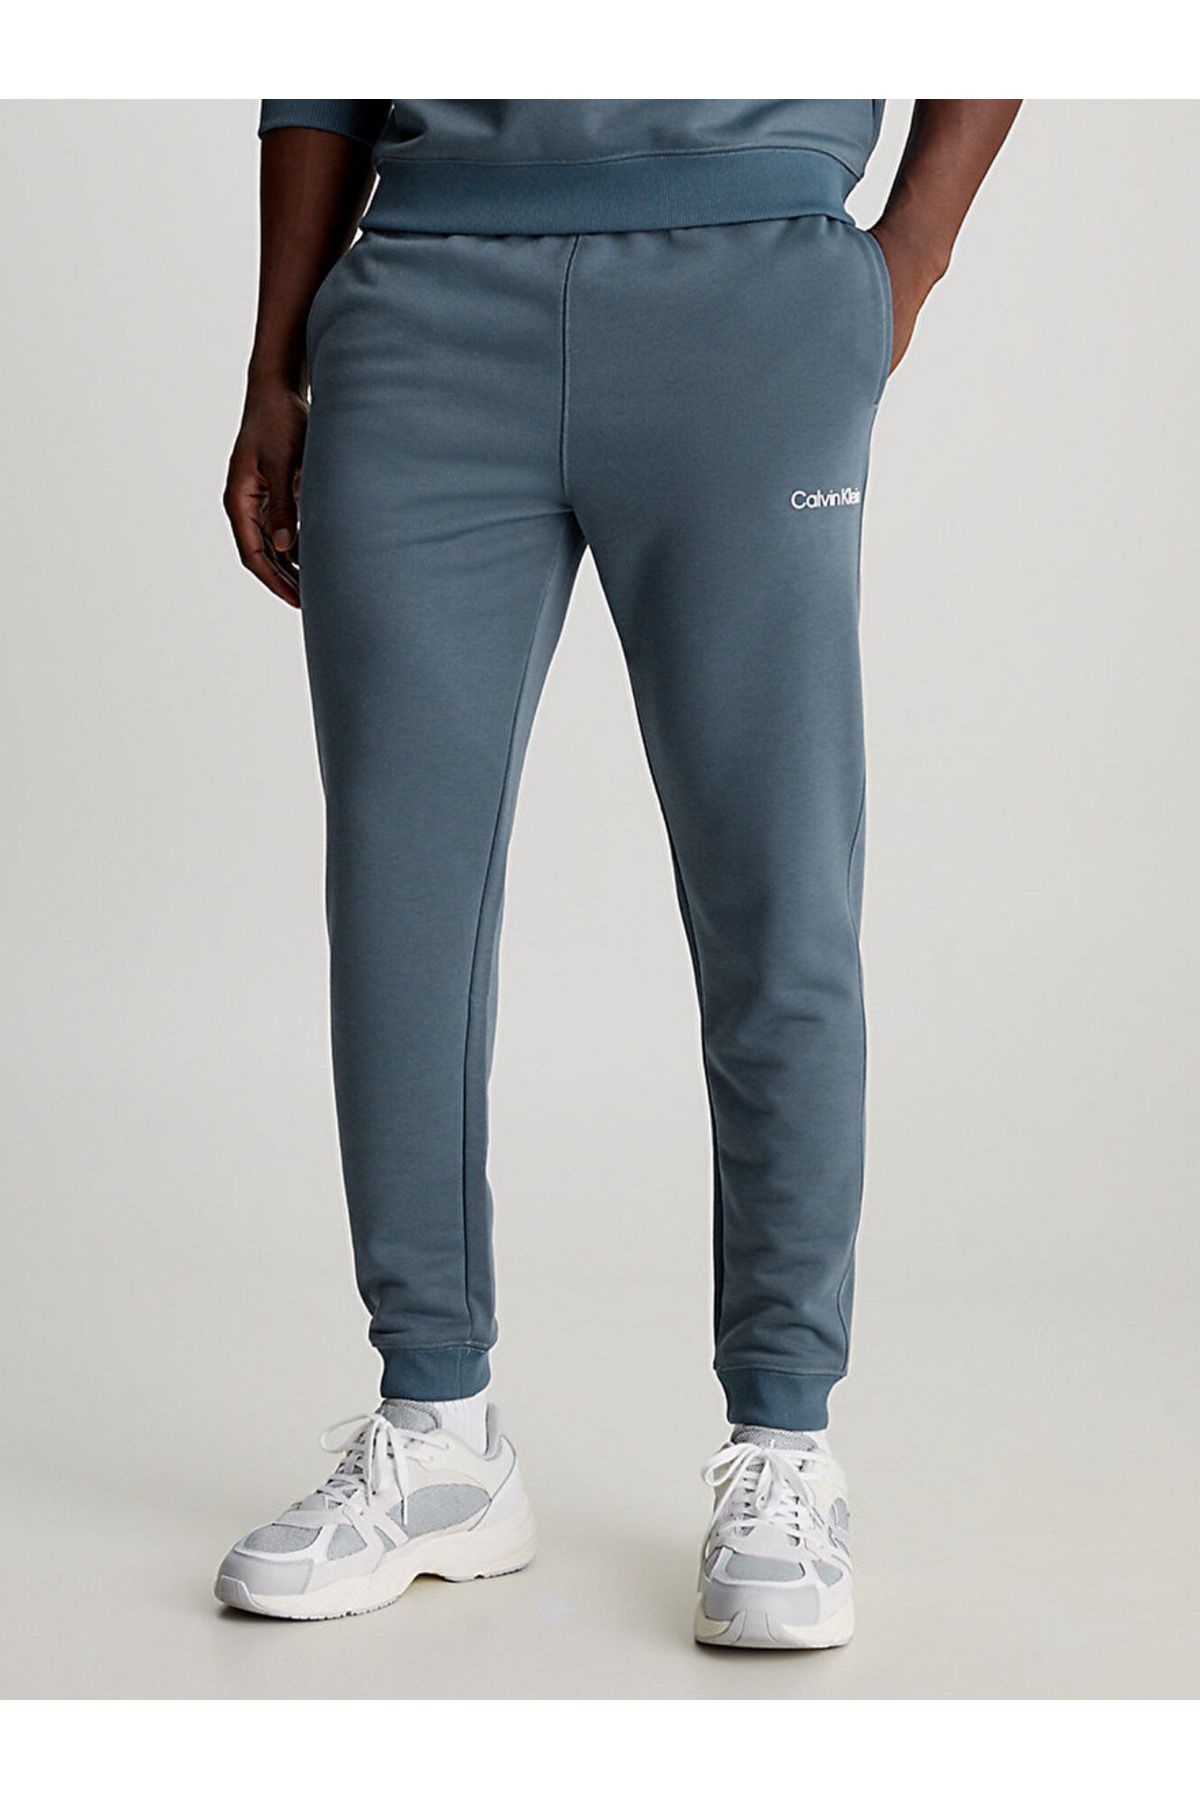 Calvin Klein French Terry Joggers